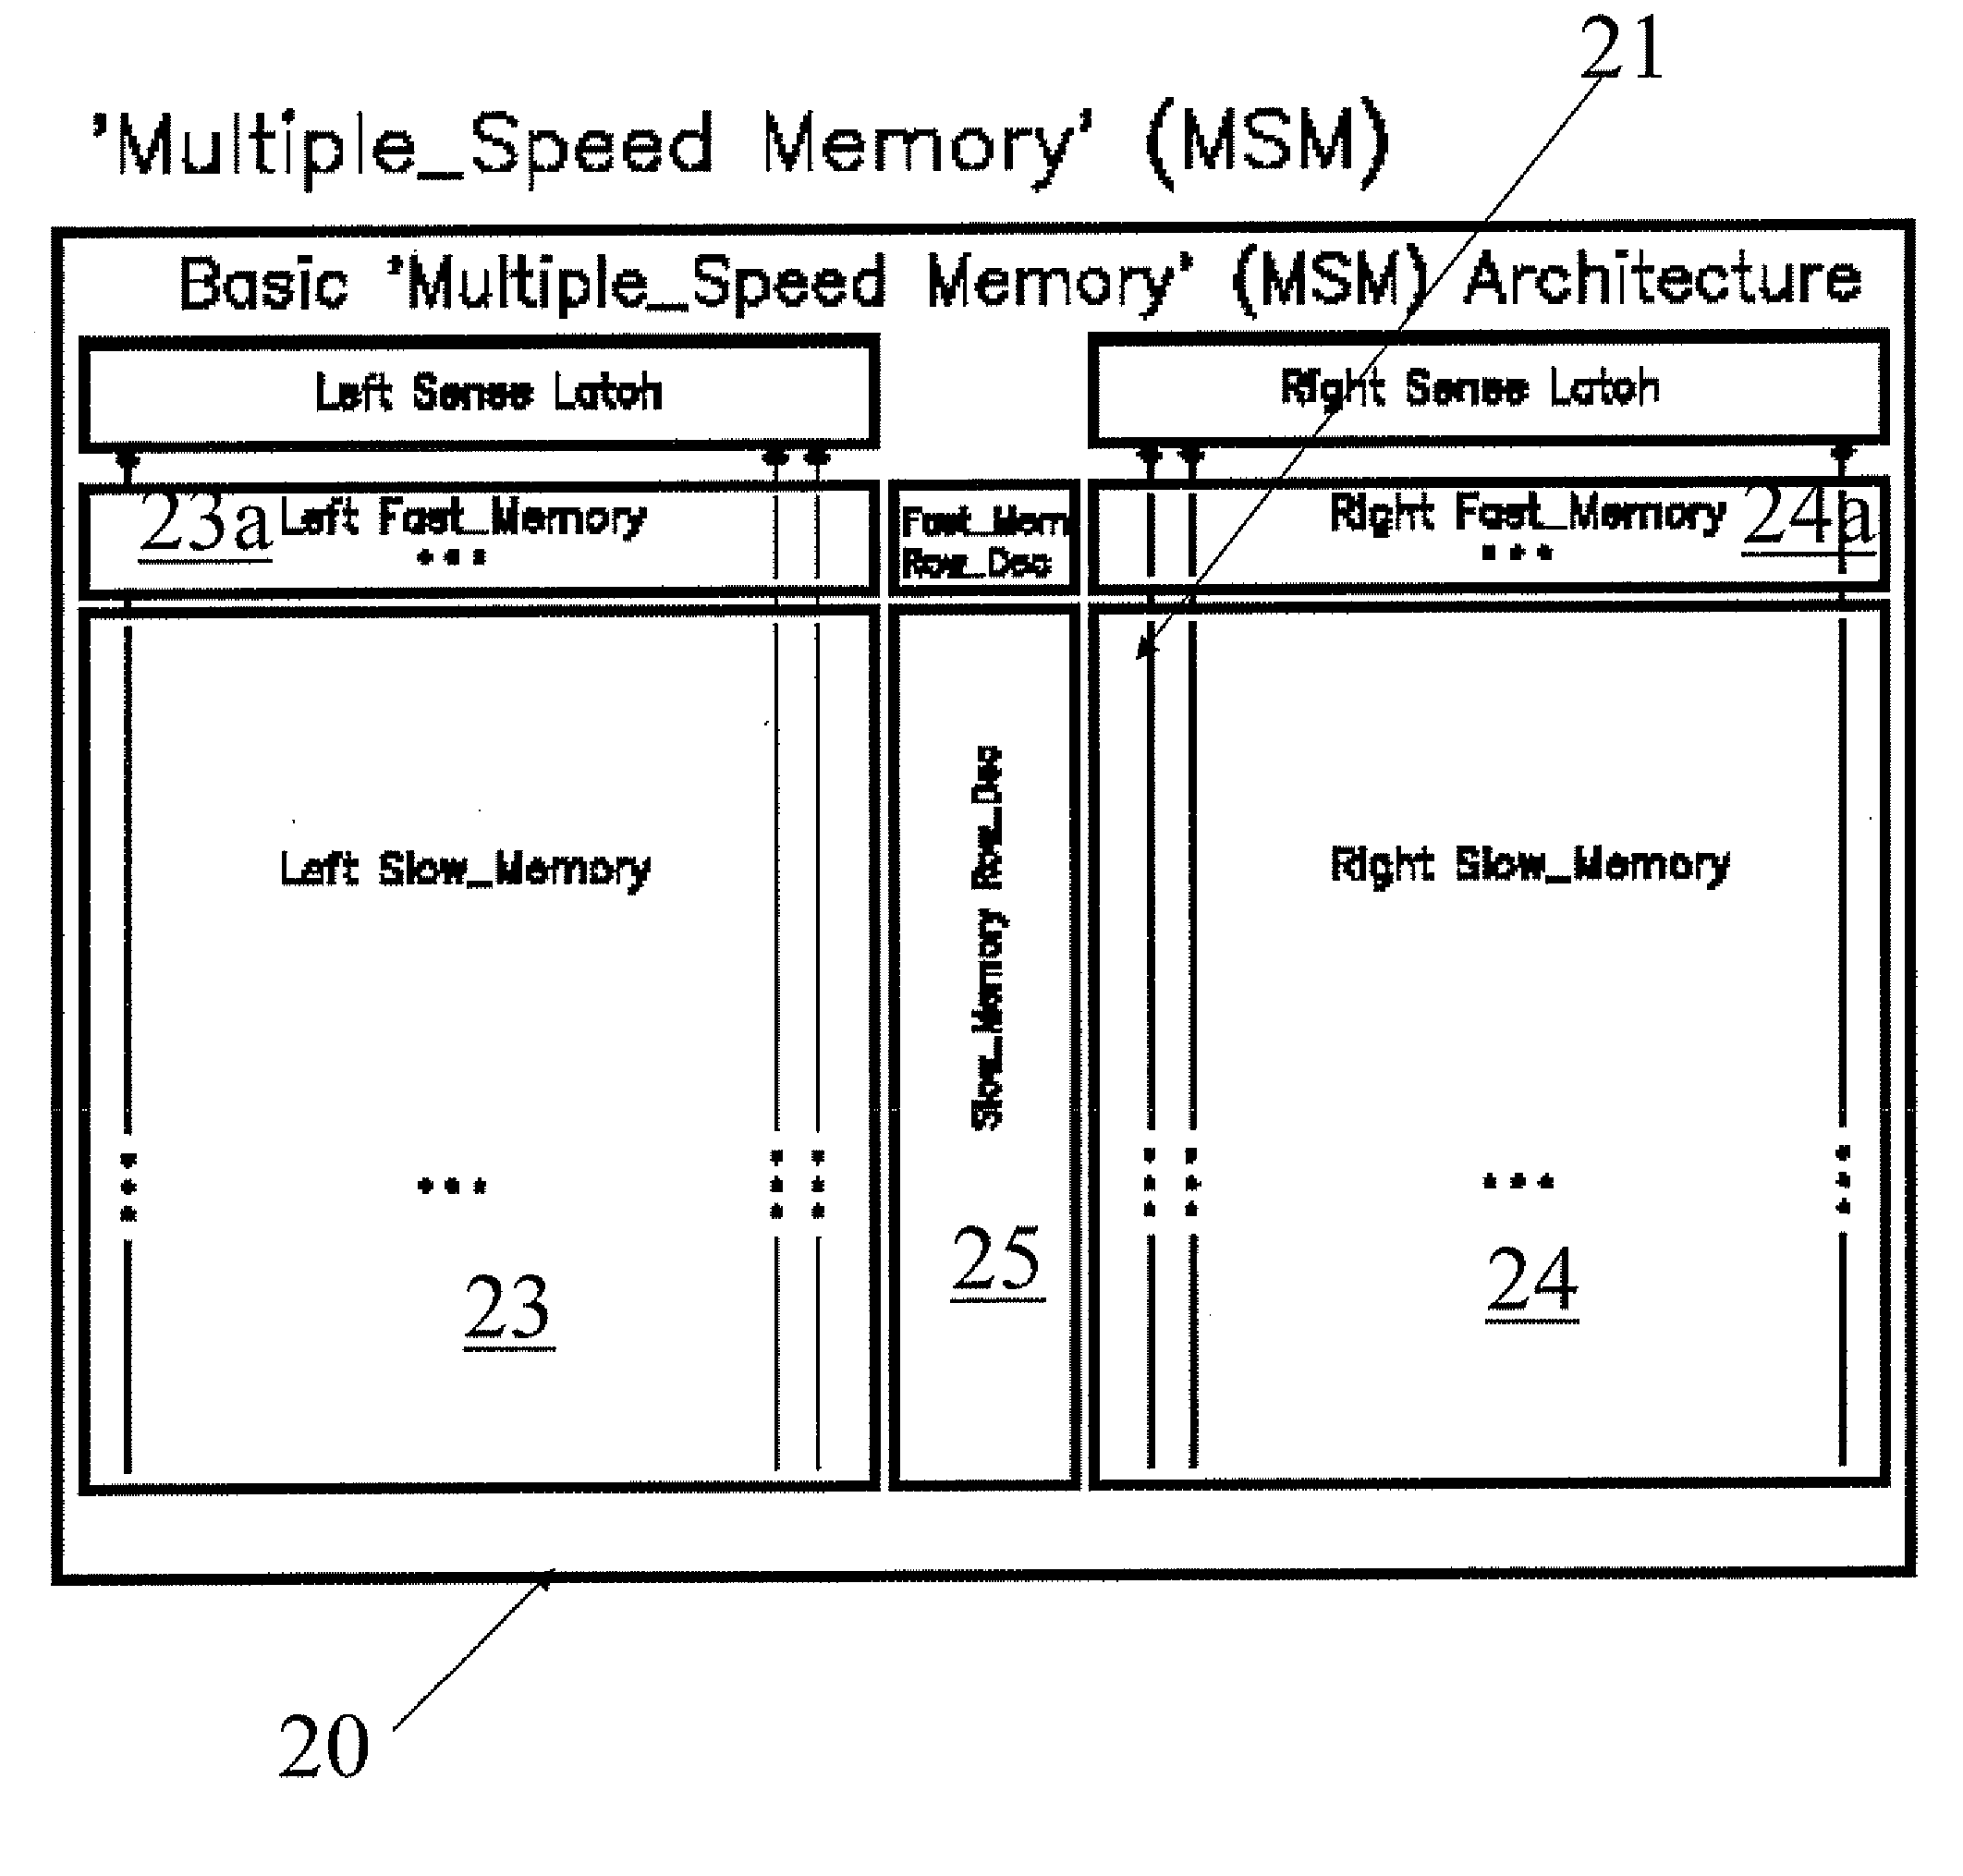 Non-volatile memory electronic device with NAND structure being monolithically integrated on semiconductor